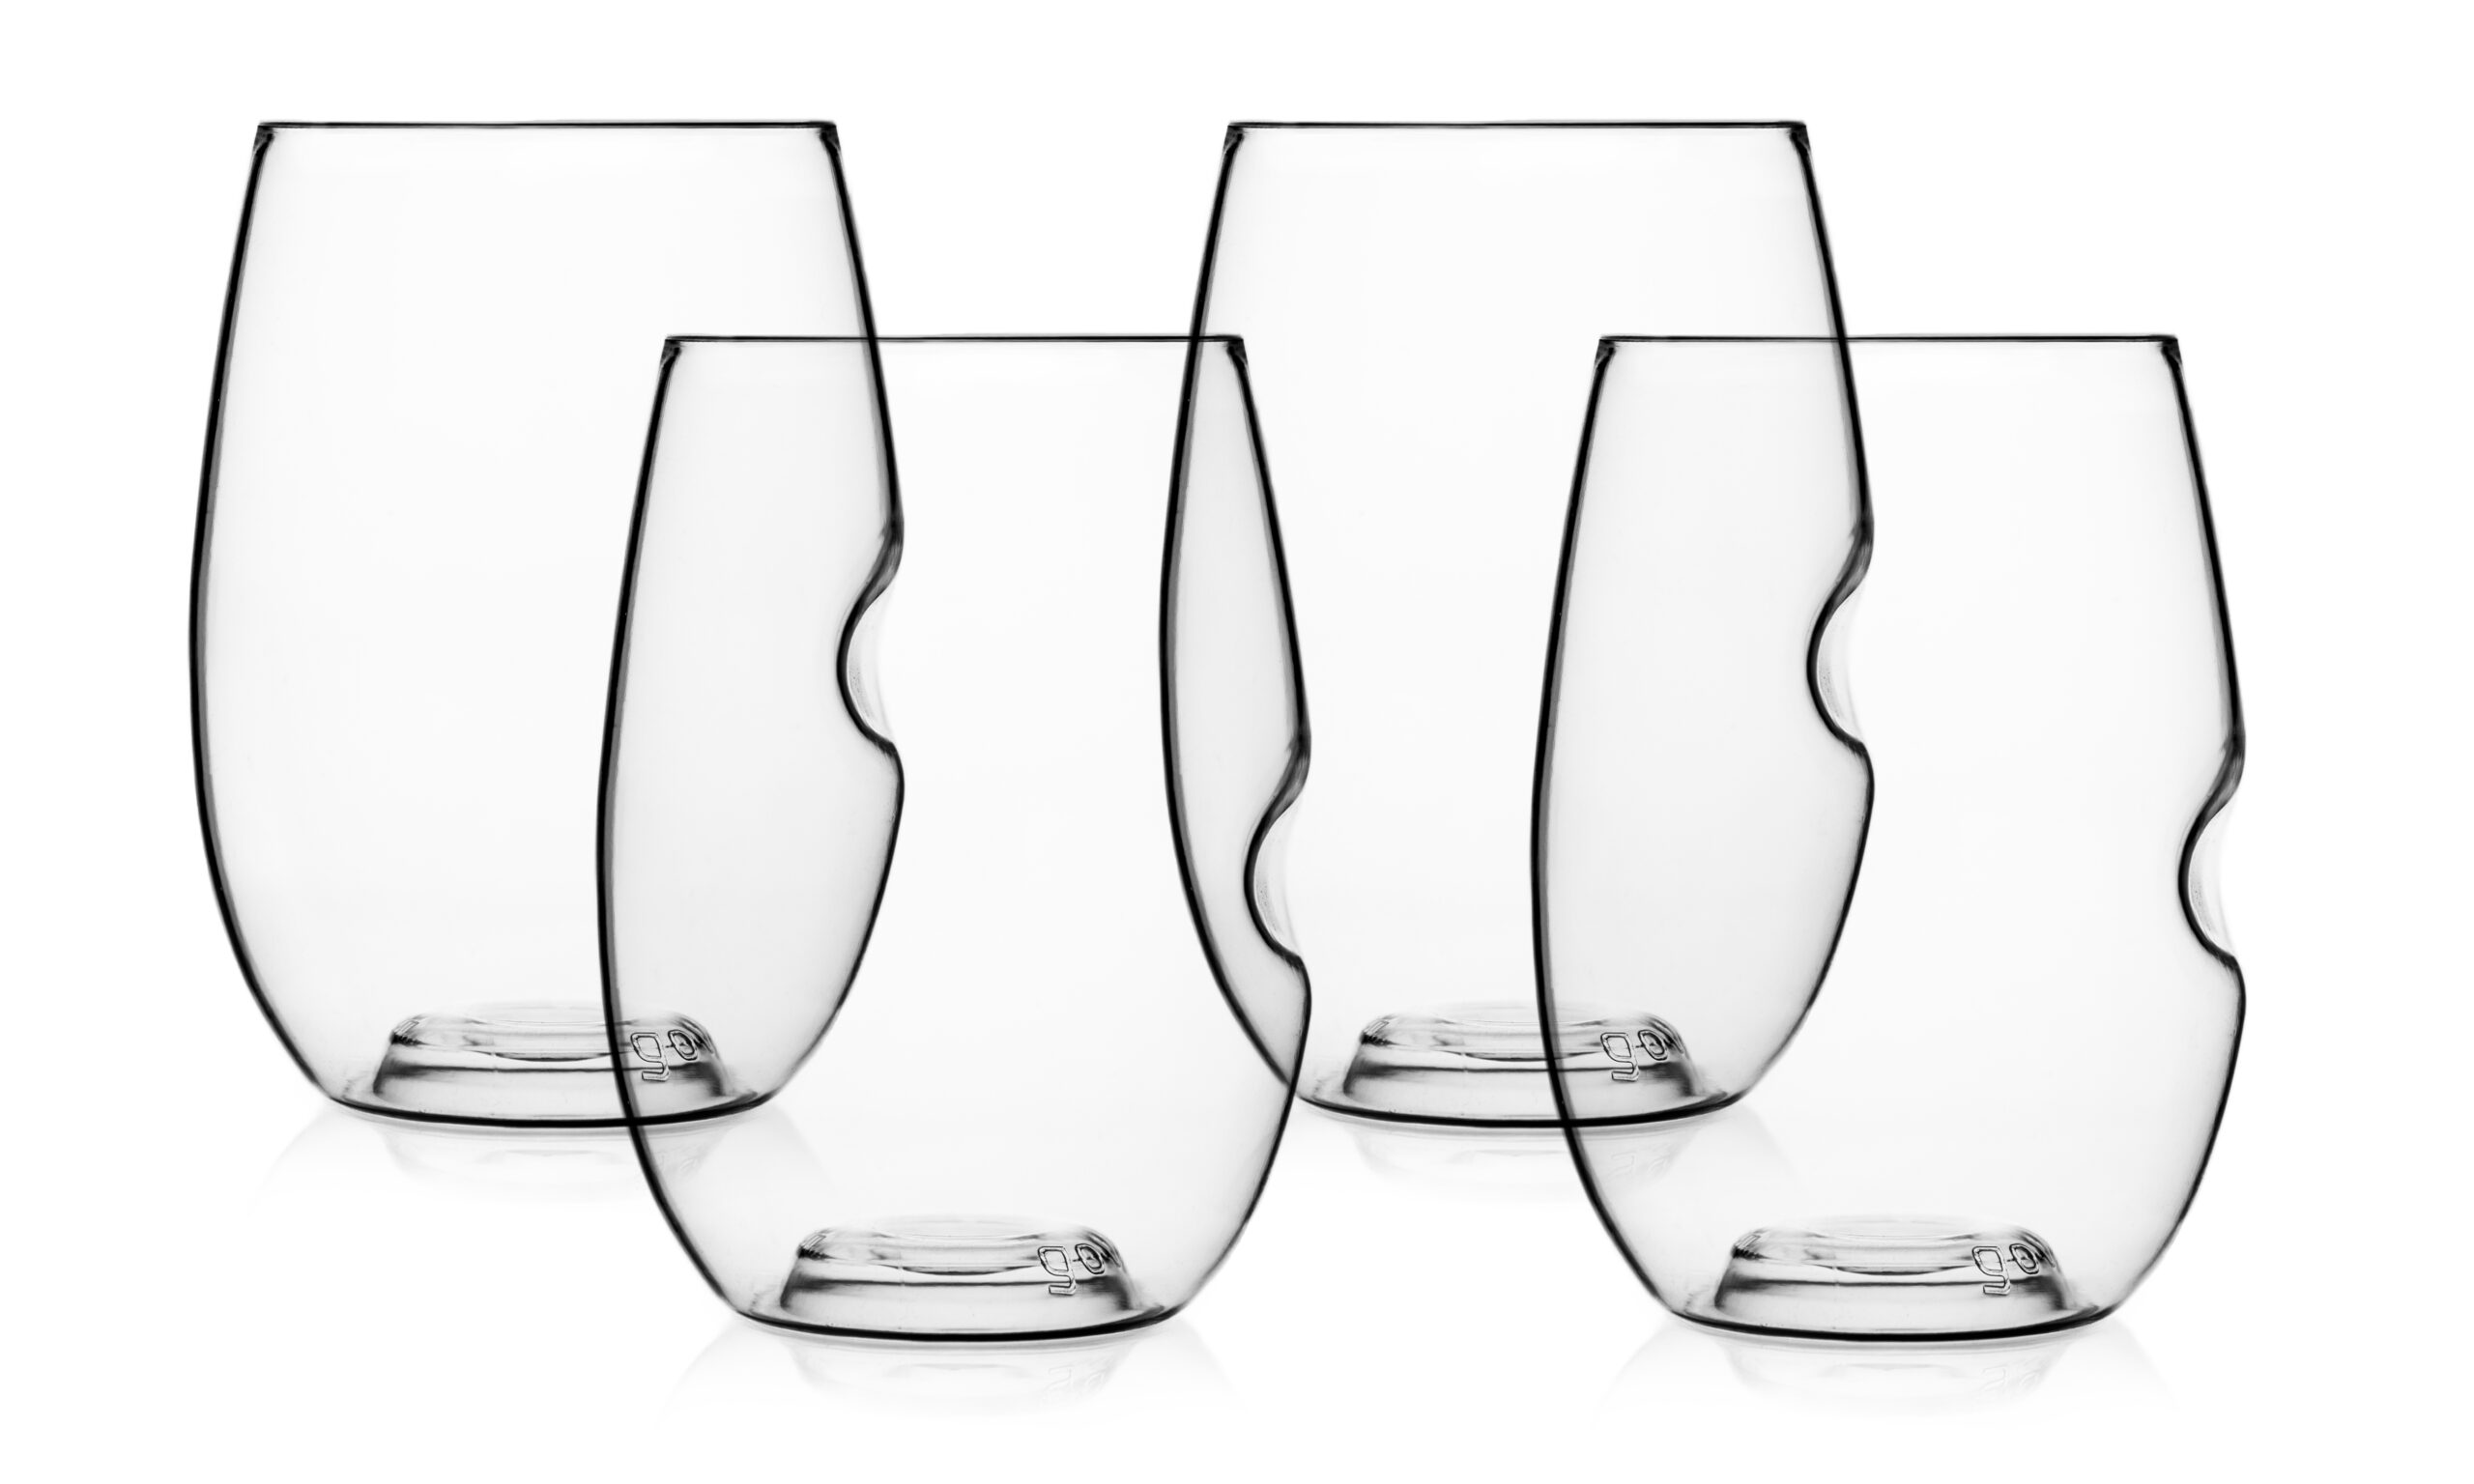 The Best Unbreakable Outdoor Wine and Beer Glasses on